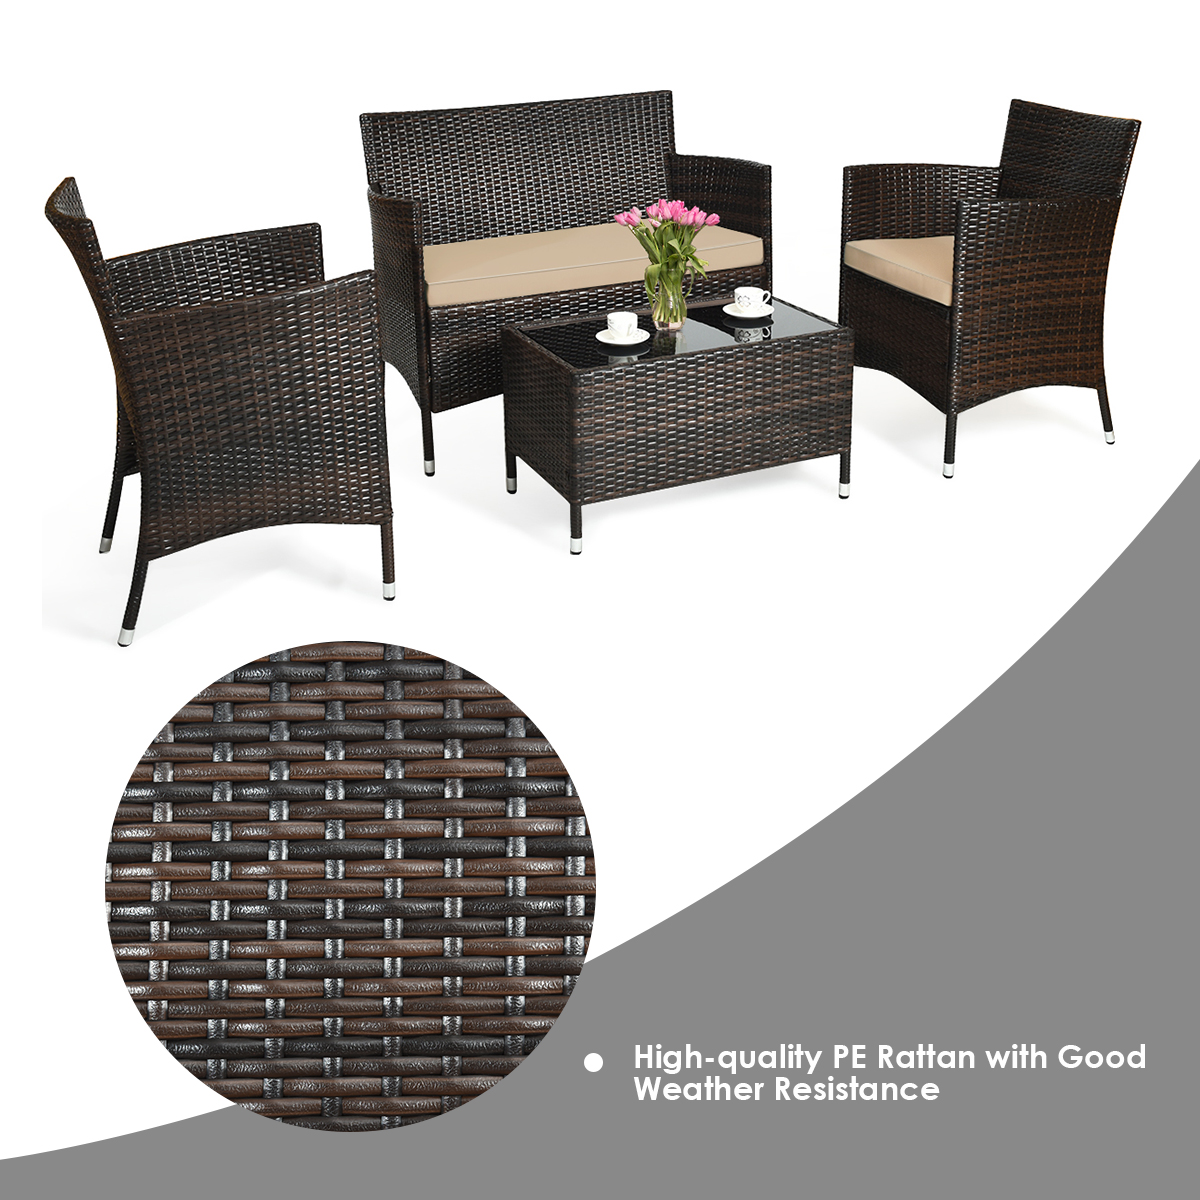 Gymax 8PCS Patio Rattan Outdoor Furniture Set w/ Cushioned Chair Loveseat Table - image 5 of 10